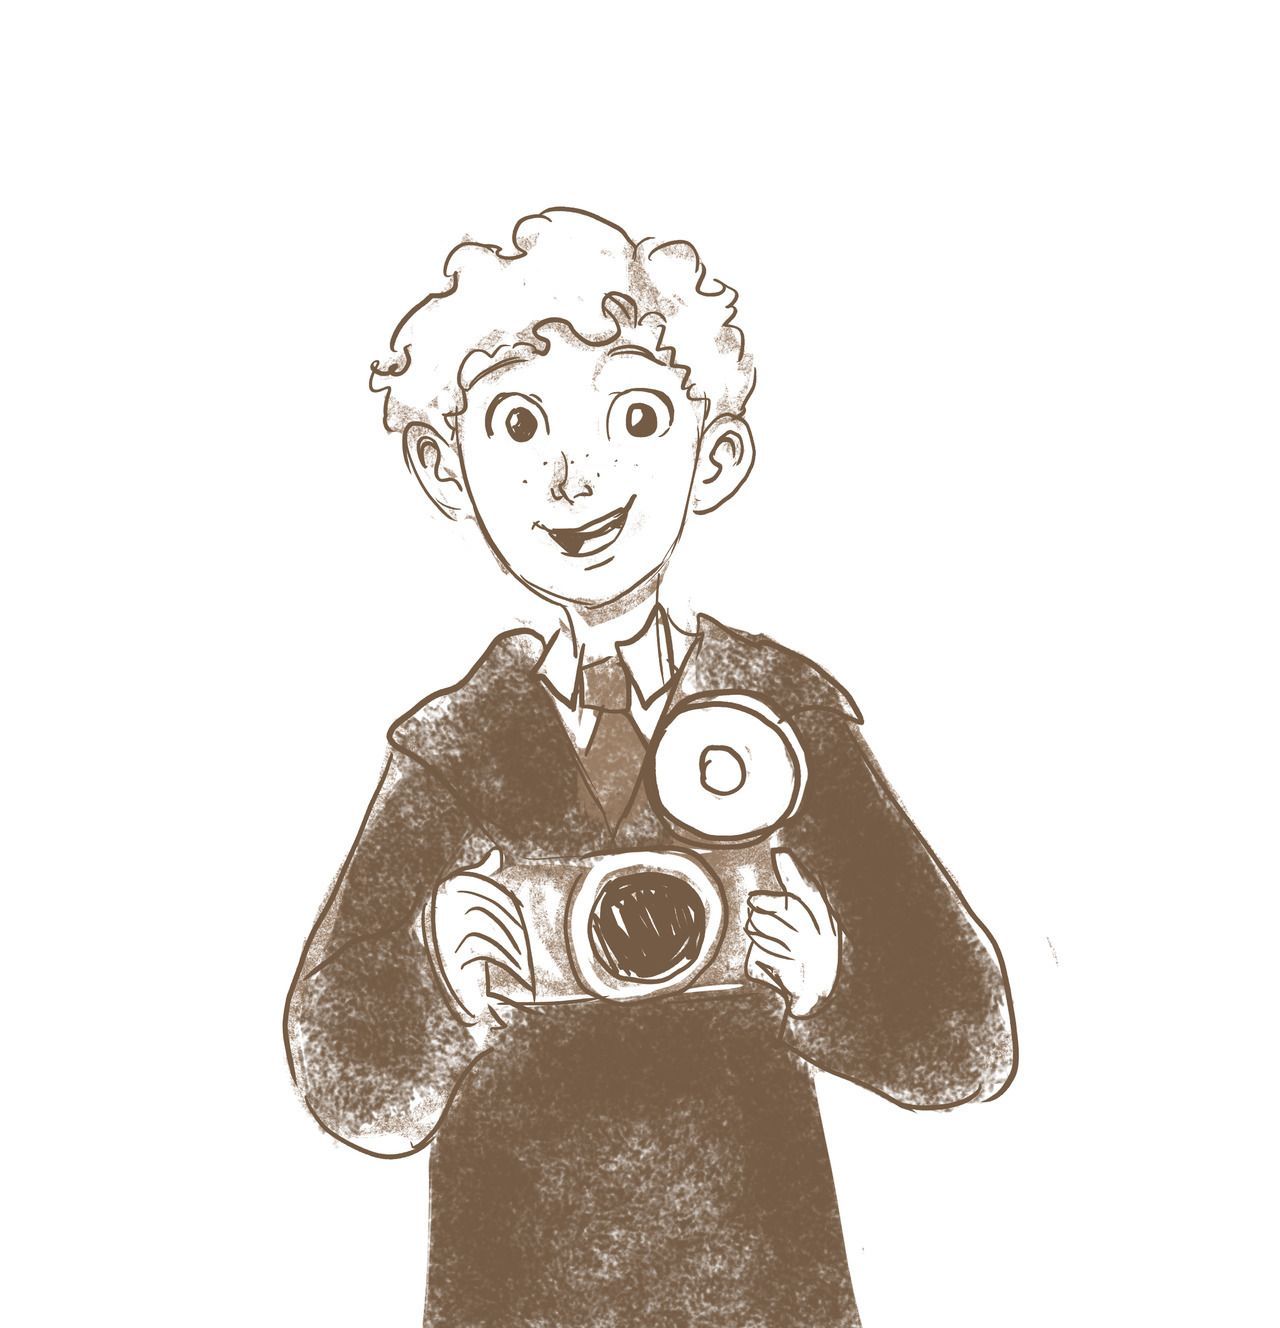 Colin Creevey sketch request from(ﾉ◕ヮ◕)ﾉ*:・ﾟ✧ ஐﻬ MY PATREON ﻬஐ. Art, Harry potter characters, Fan art